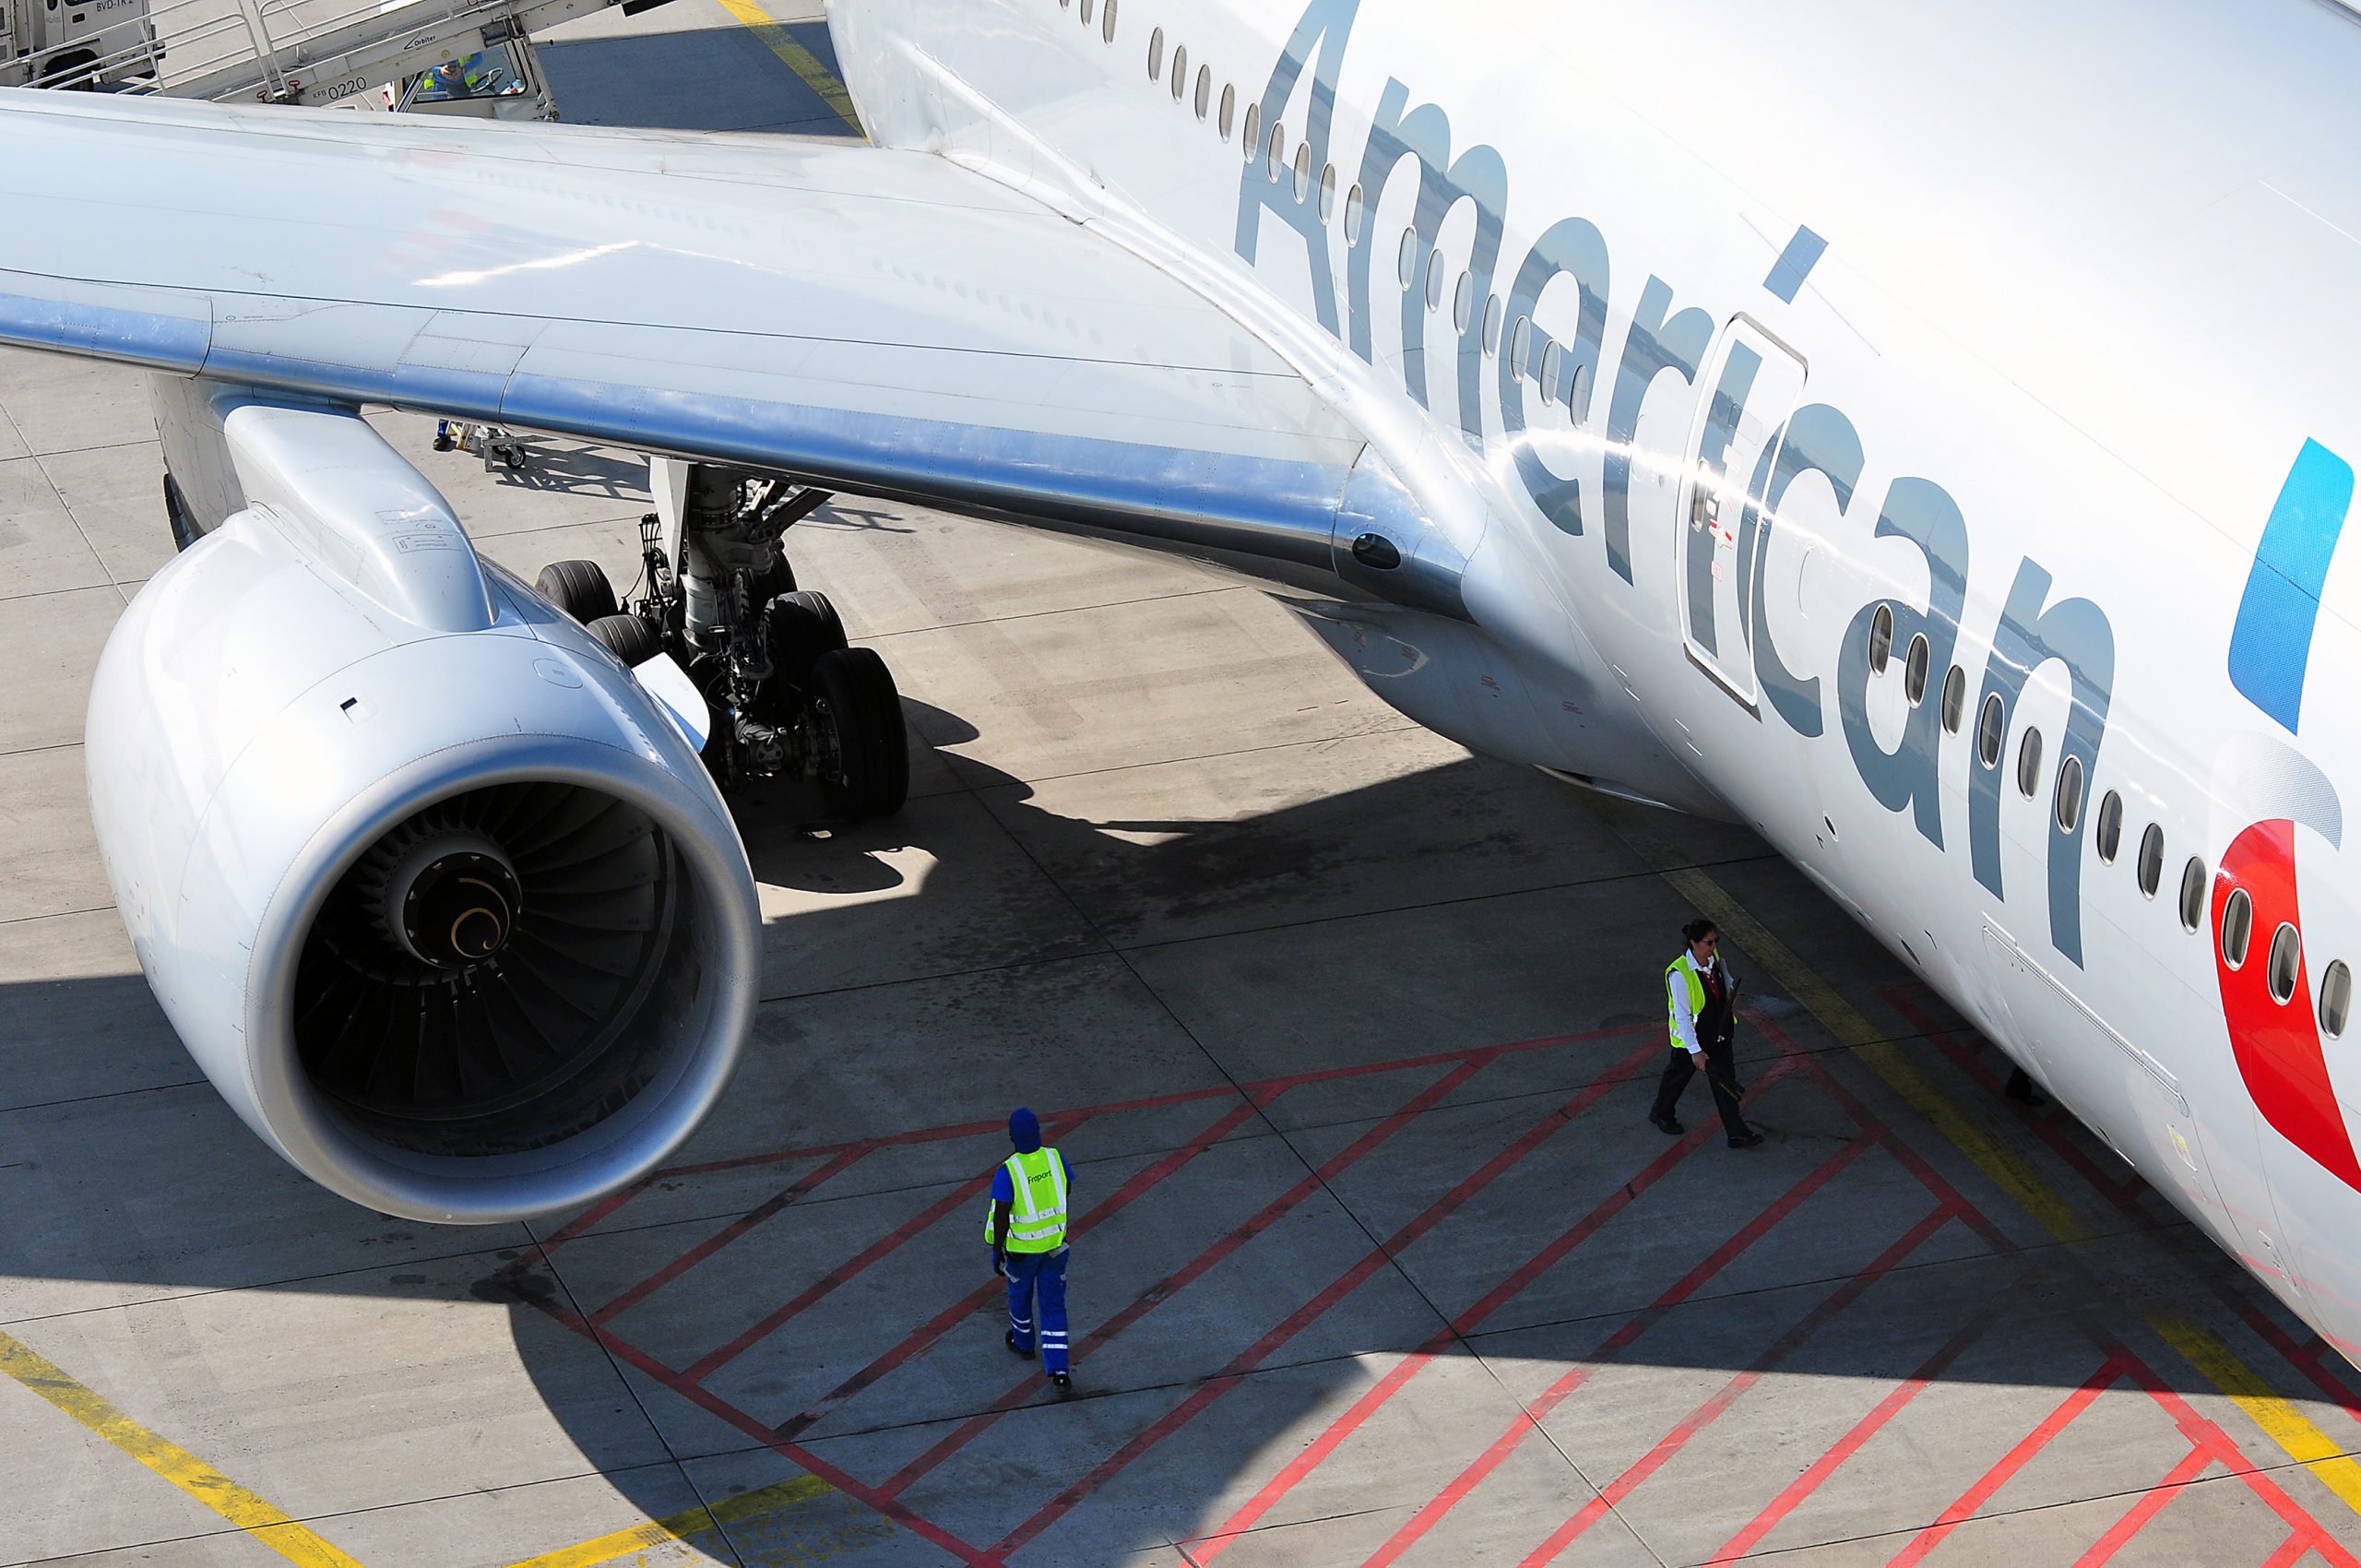 Good Luck Getting Back From Europe, American Airlines Tells Non-Rev Passengers